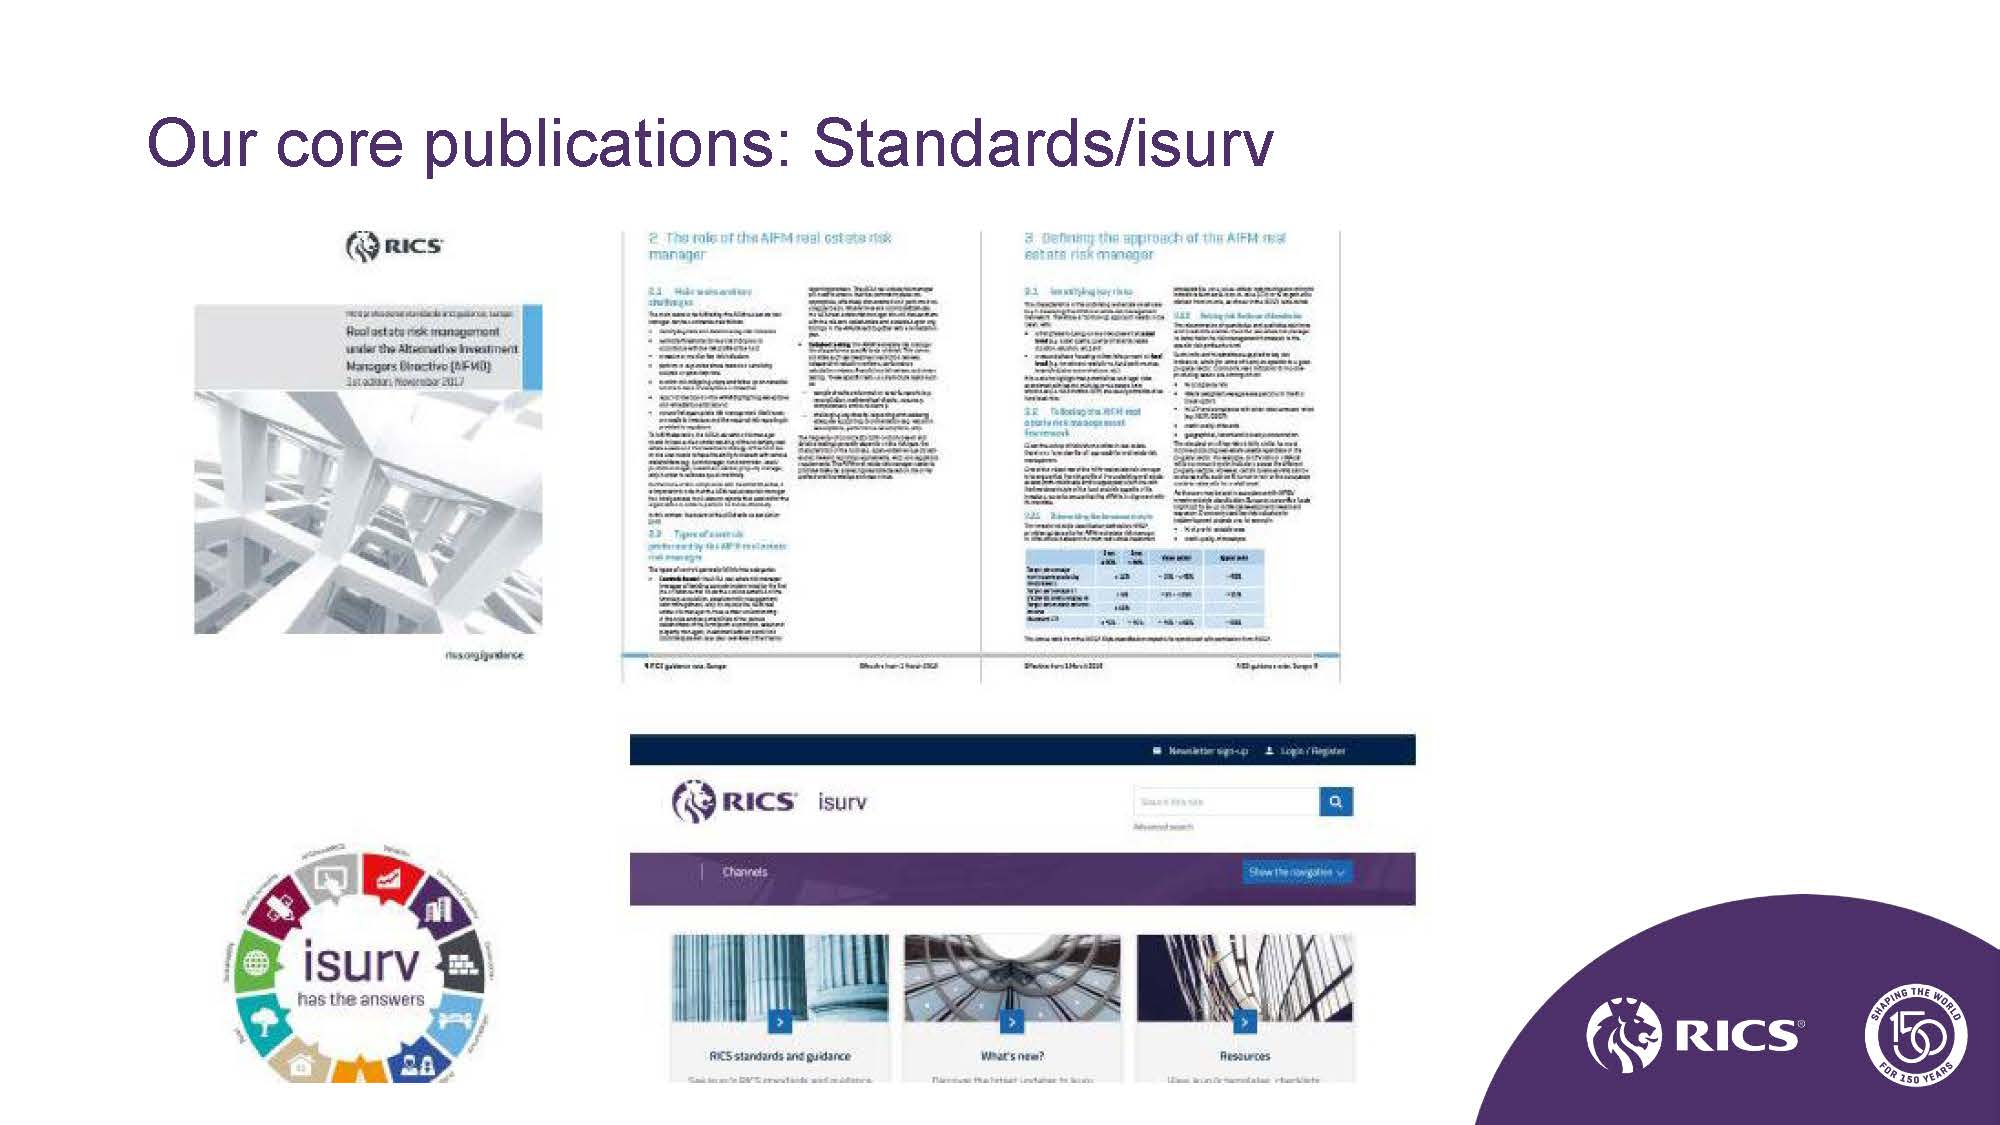 Slide with screenshots of a cover and internal spread from a RICS standard, including images, titles, text, bullet points and a table. The slide also contains a screenshot of the isurv online interface, and a logo that says ‘isurv has the answers’.